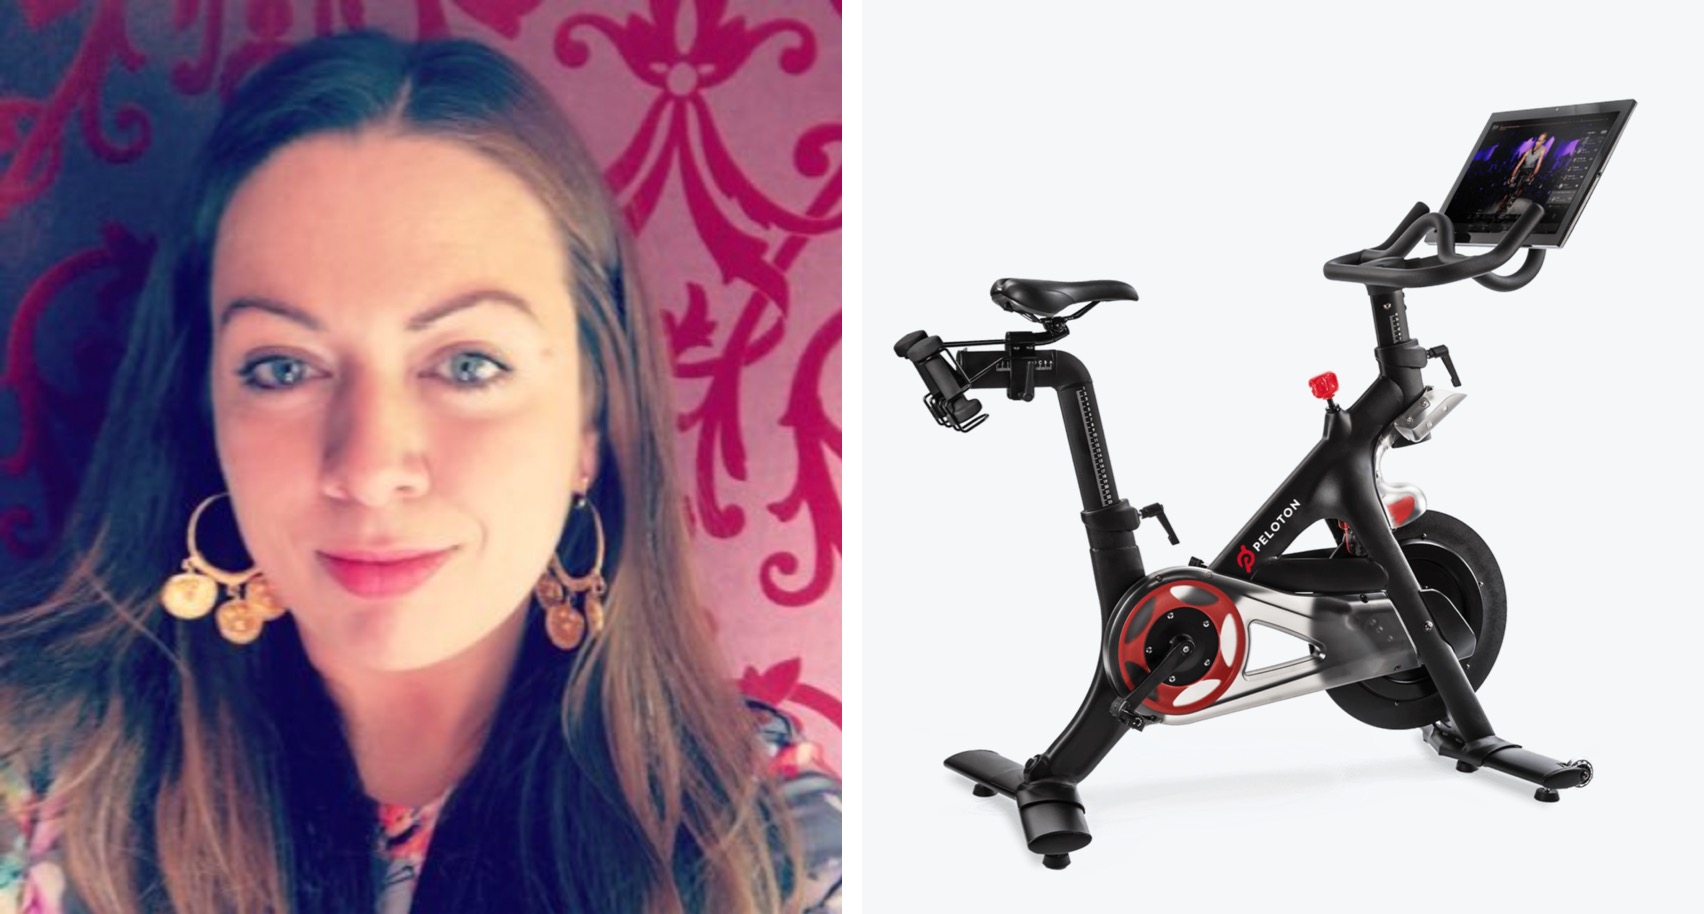 Dad Discourages Daughter From Buying Peloton Bike in Viral Email Rant